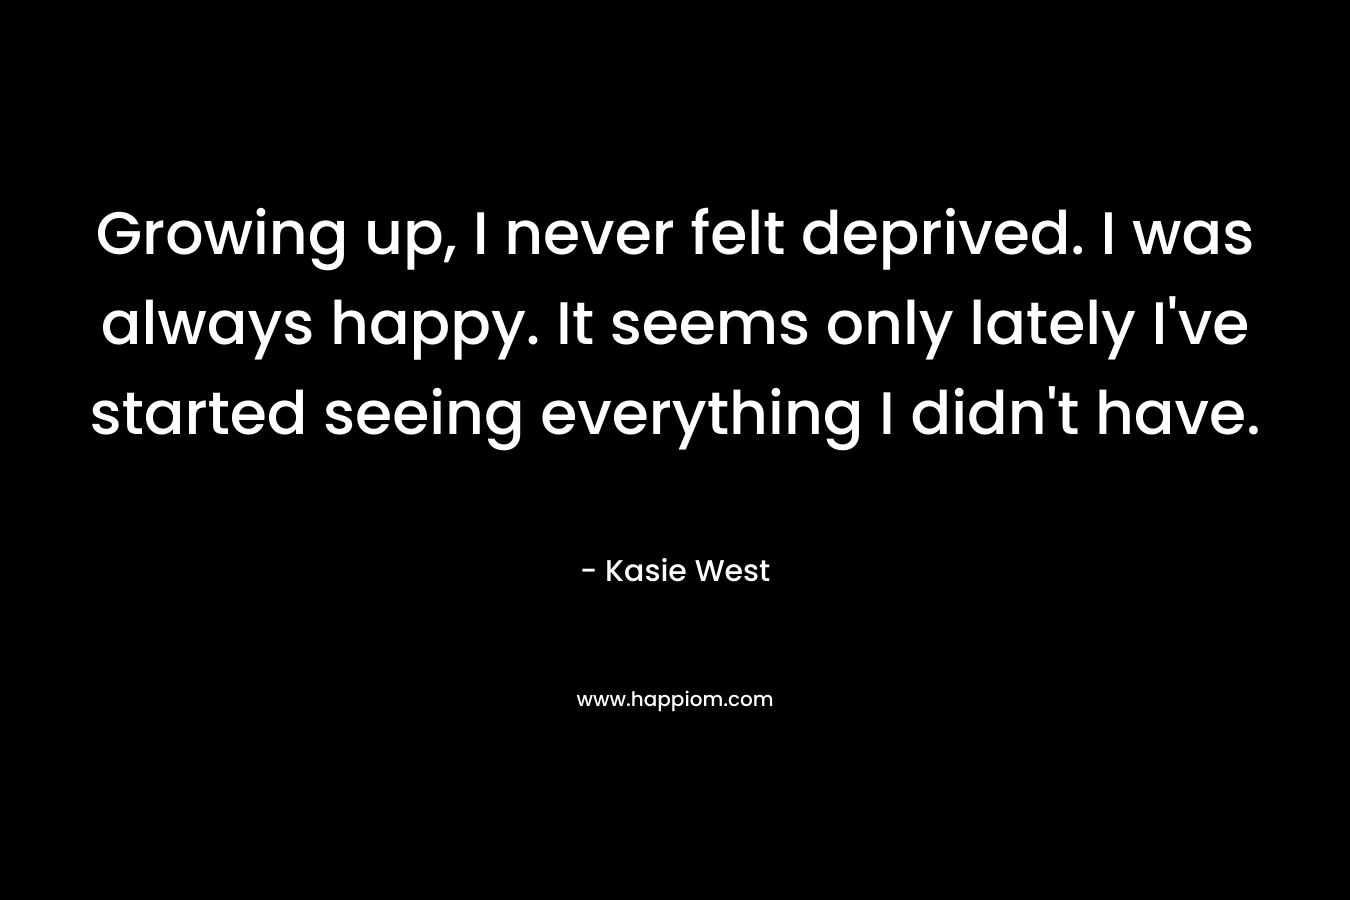 Growing up, I never felt deprived. I was always happy. It seems only lately I've started seeing everything I didn't have.